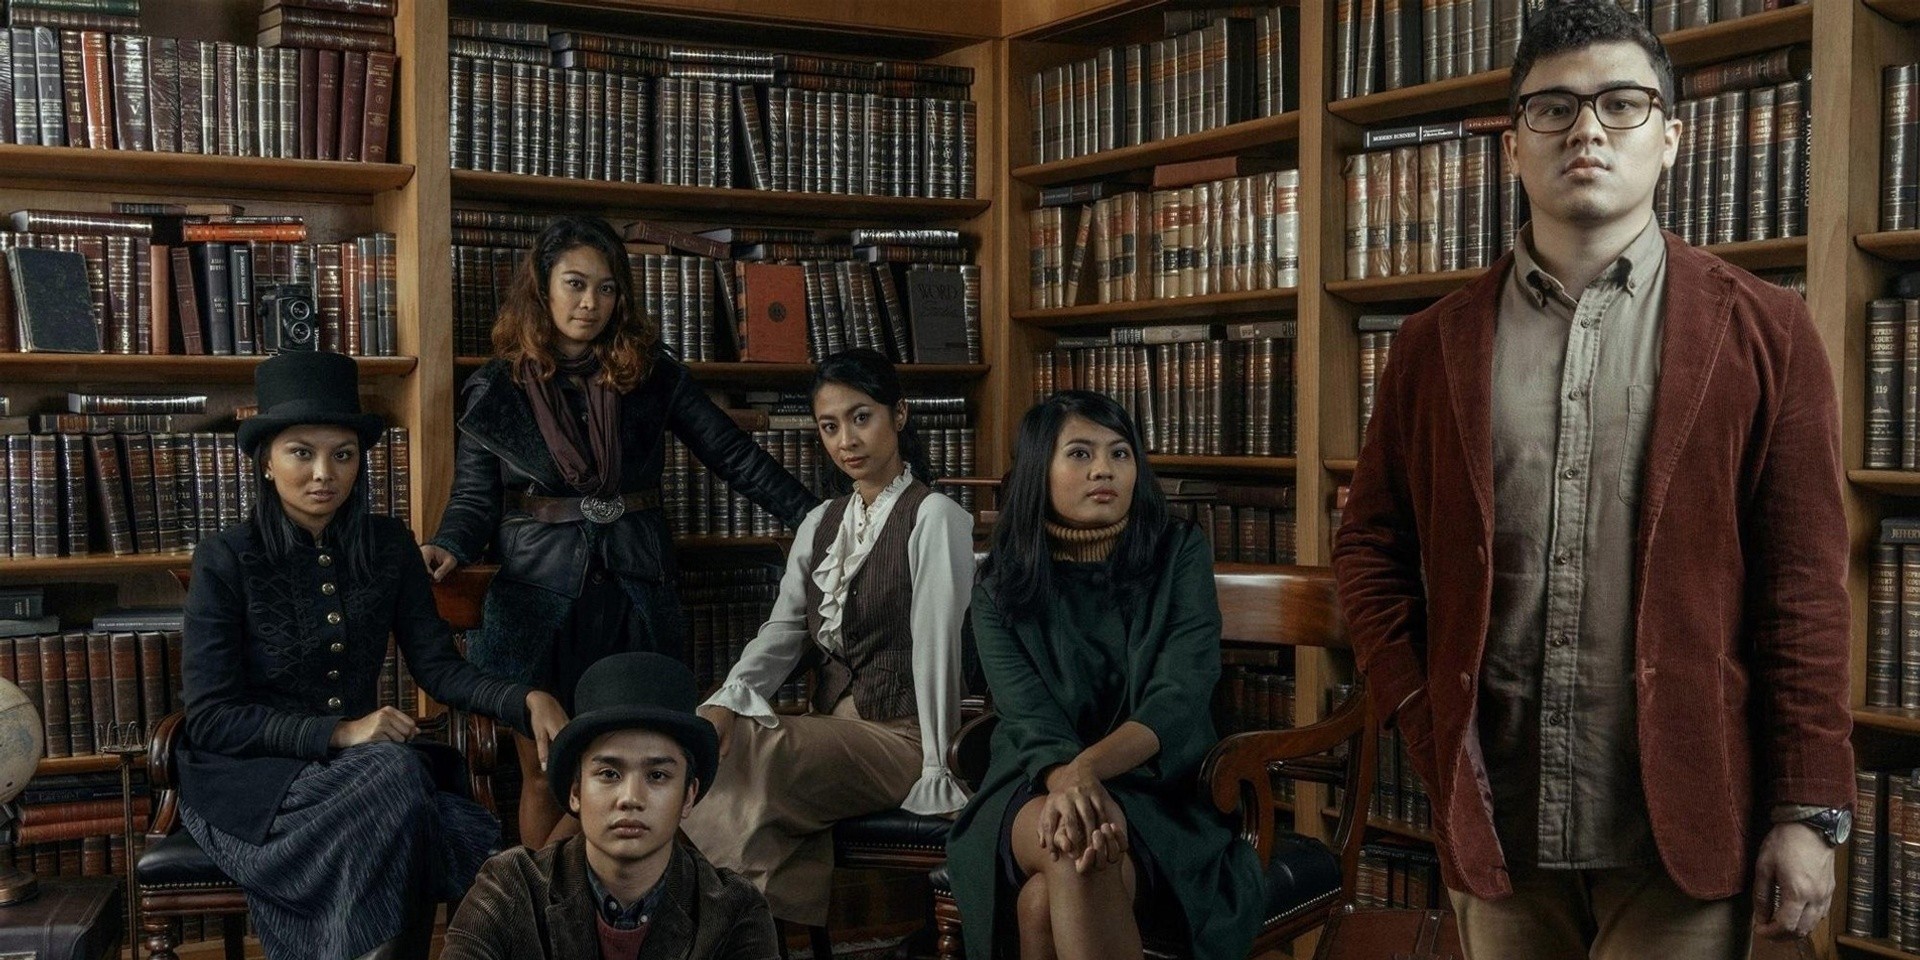 The Ransom Collective to perform at Summer Us, Now Music & Art Festival in Indonesia